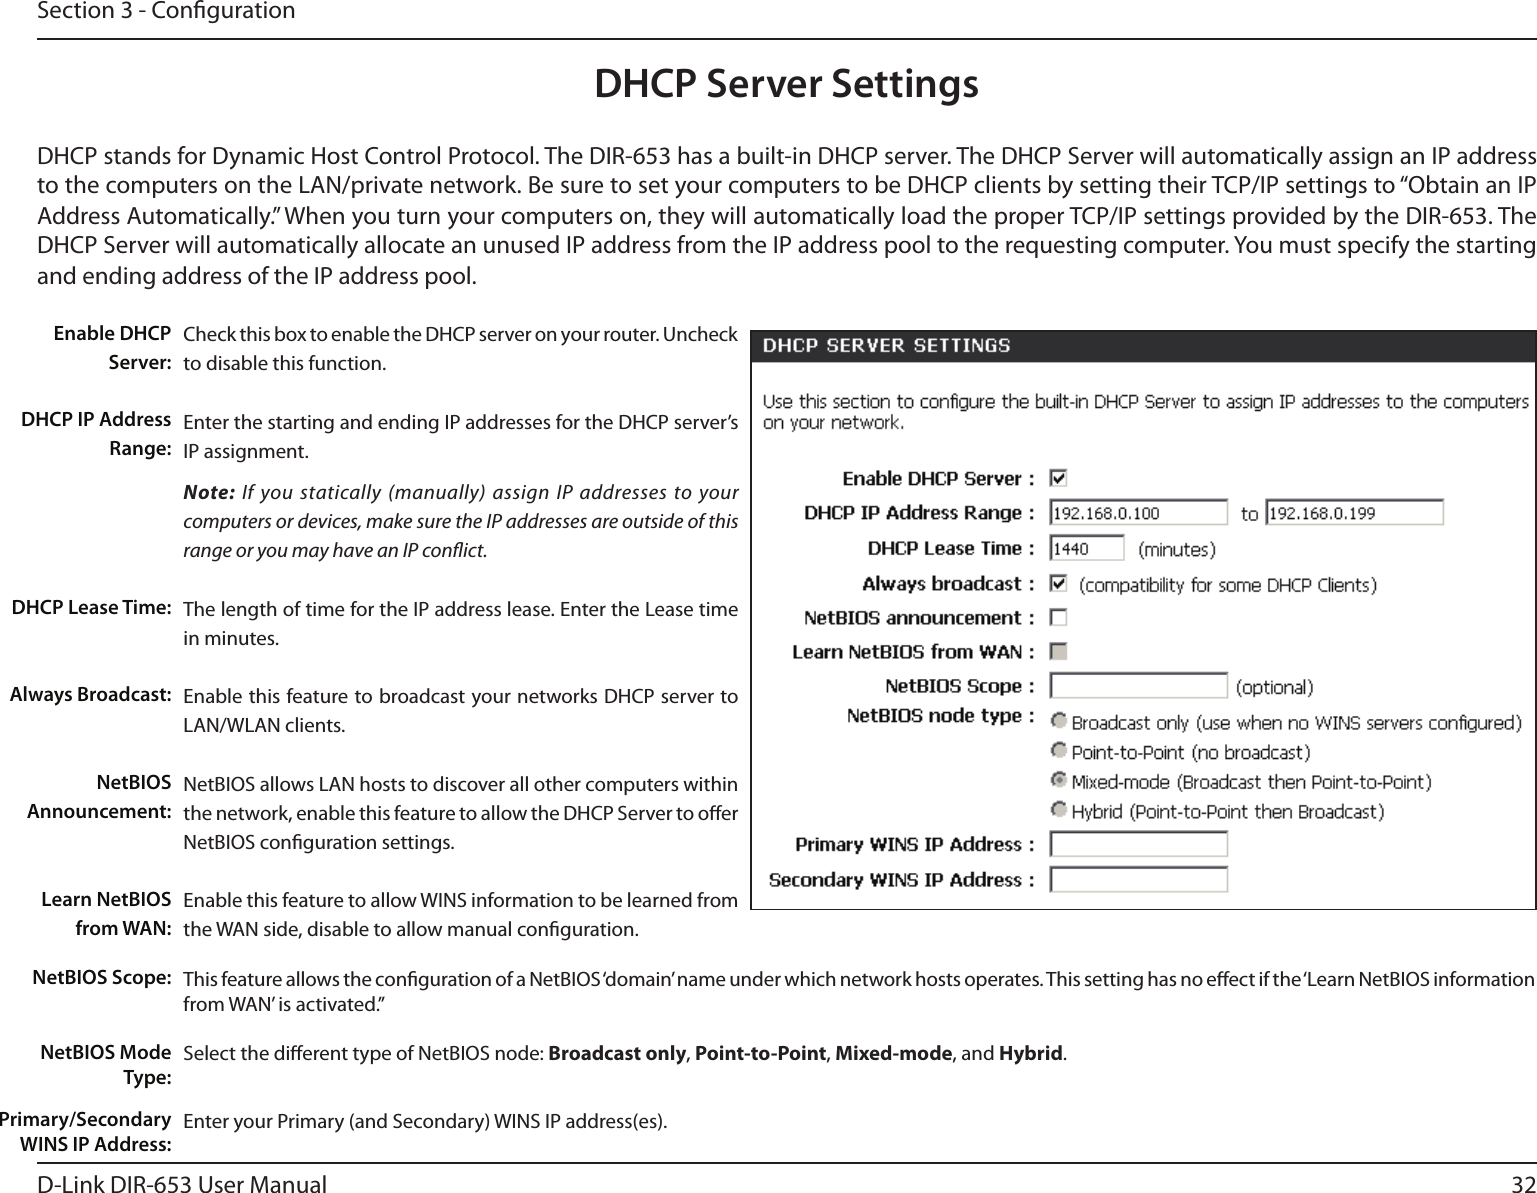 32D-Link DIR-653 User ManualSection 3 - CongurationDHCP Server SettingsDHCP stands for Dynamic Host Control Protocol. The DIR-653 has a built-in DHCP server. The DHCP Server will automatically assign an IP address to the computers on the LAN/private network. Be sure to set your computers to be DHCP clients by setting their TCP/IP settings to “Obtain an IP Address Automatically.” When you turn your computers on, they will automatically load the proper TCP/IP settings provided by the DIR-653. The DHCP Server will automatically allocate an unused IP address from the IP address pool to the requesting computer. You must specify the starting and ending address of the IP address pool.Check this box to enable the DHCP server on your router. Uncheck to disable this function.Enter the starting and ending IP addresses for the DHCP server’s IP assignment.Note: If you statically (manually) assign IP addresses to your computers or devices, make sure the IP addresses are outside of this range or you may have an IP conict. The length of time for the IP address lease. Enter the Lease time in minutes.Enable this feature to broadcast your networks DHCP server to LAN/WLAN clients.NetBIOS allows LAN hosts to discover all other computers within the network, enable this feature to allow the DHCP Server to oer NetBIOS conguration settings.Enable this feature to allow WINS information to be learned from the WAN side, disable to allow manual conguration.This feature allows the conguration of a NetBIOS ‘domain’ name under which network hosts operates. This setting has no eect if the ‘Learn NetBIOS information from WAN’ is activated.”Select the dierent type of NetBIOS node: Broadcast only, Point-to-Point, Mixed-mode, and Hybrid.Enter your Primary (and Secondary) WINS IP address(es).Enable DHCP Server:DHCP IP Address Range:DHCP Lease Time:Always Broadcast:NetBIOS Announcement:Learn NetBIOS from WAN:NetBIOS Scope:NetBIOS Mode Type:Primary/Secondary WINS IP Address: